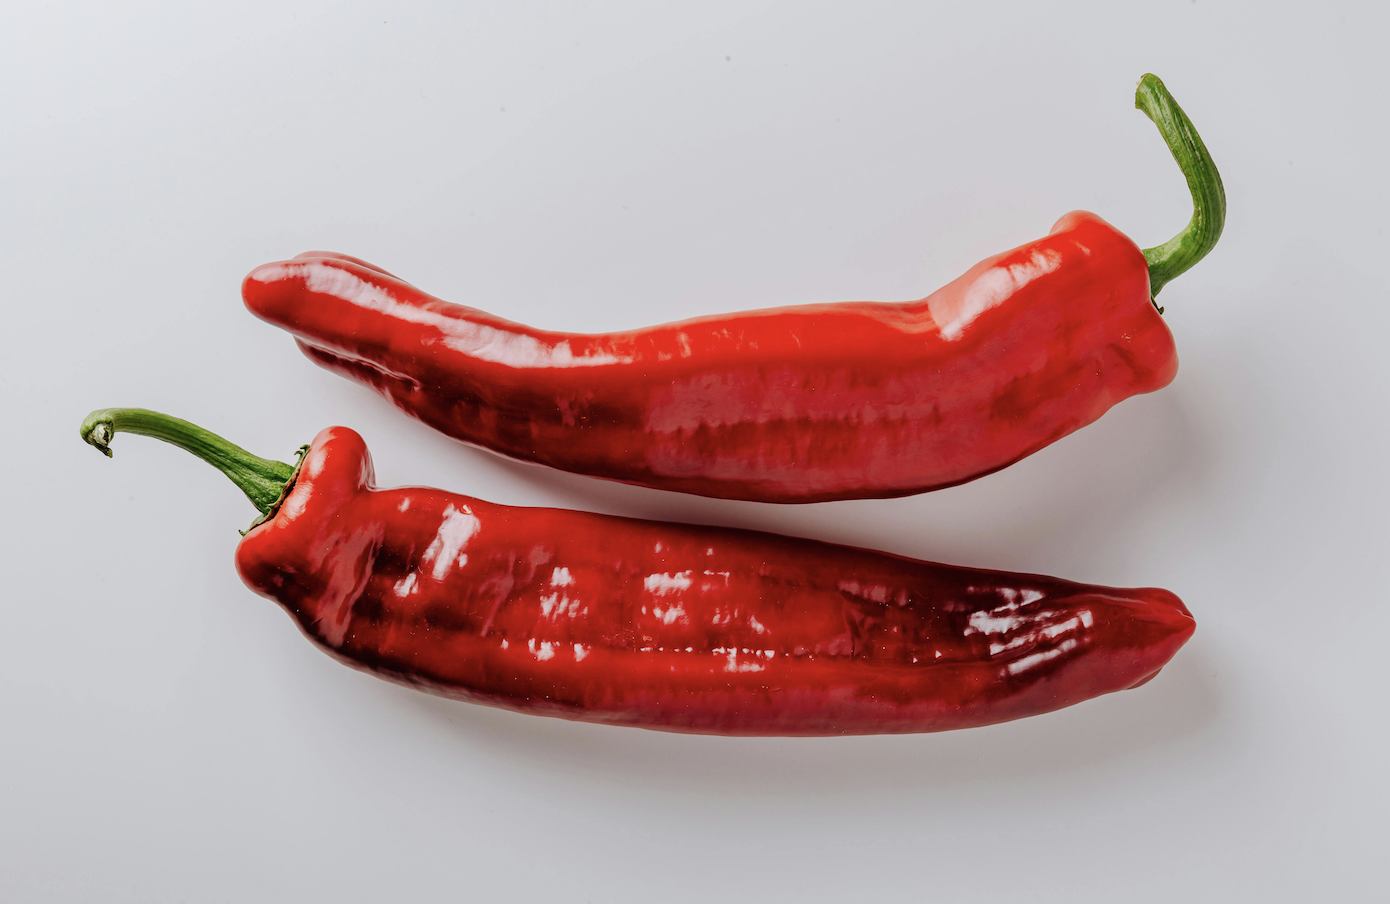 Are Spicy Foods Harmful or Healthy?